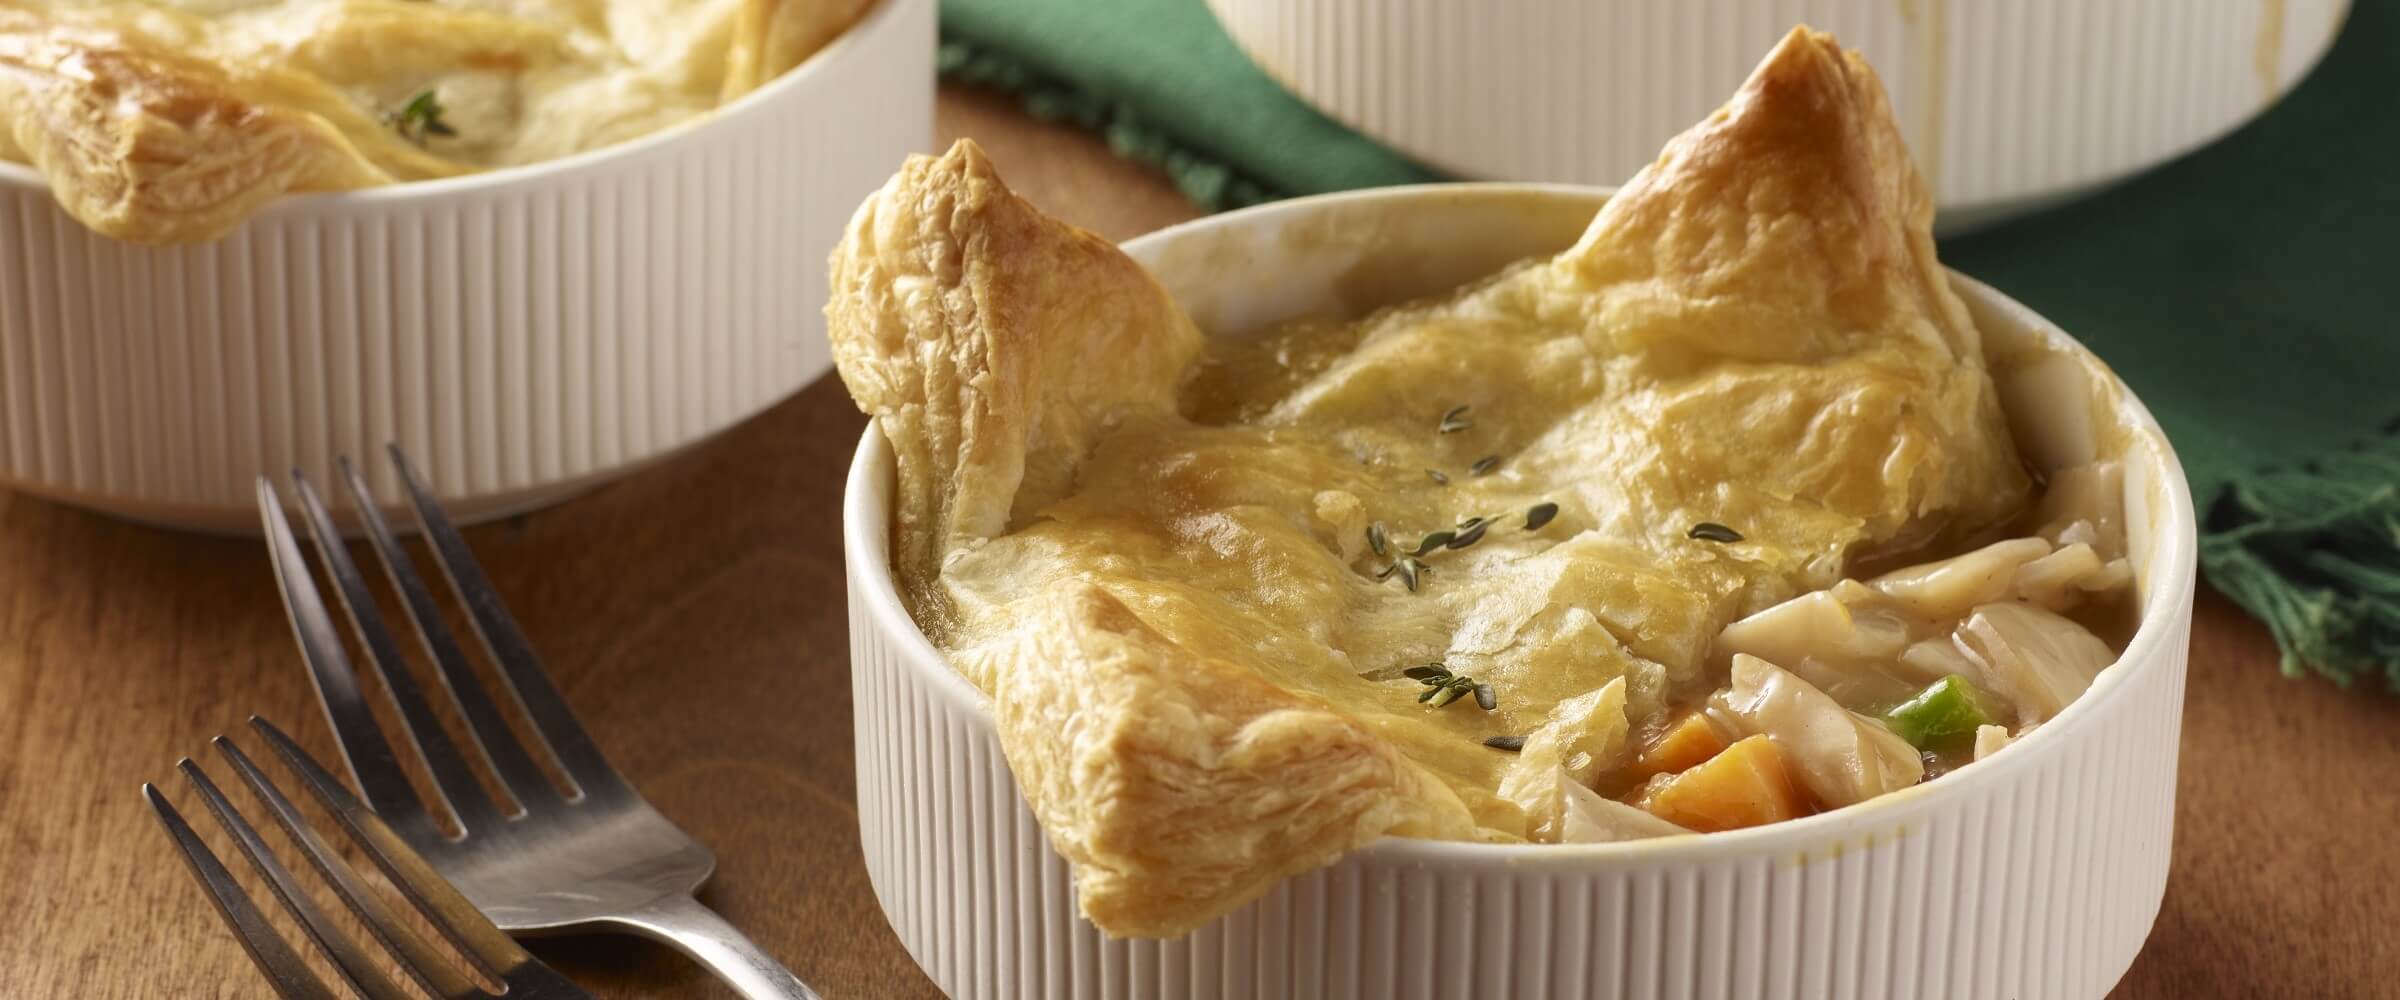 individual puff pastry turkey pot pie in white bowls with forks